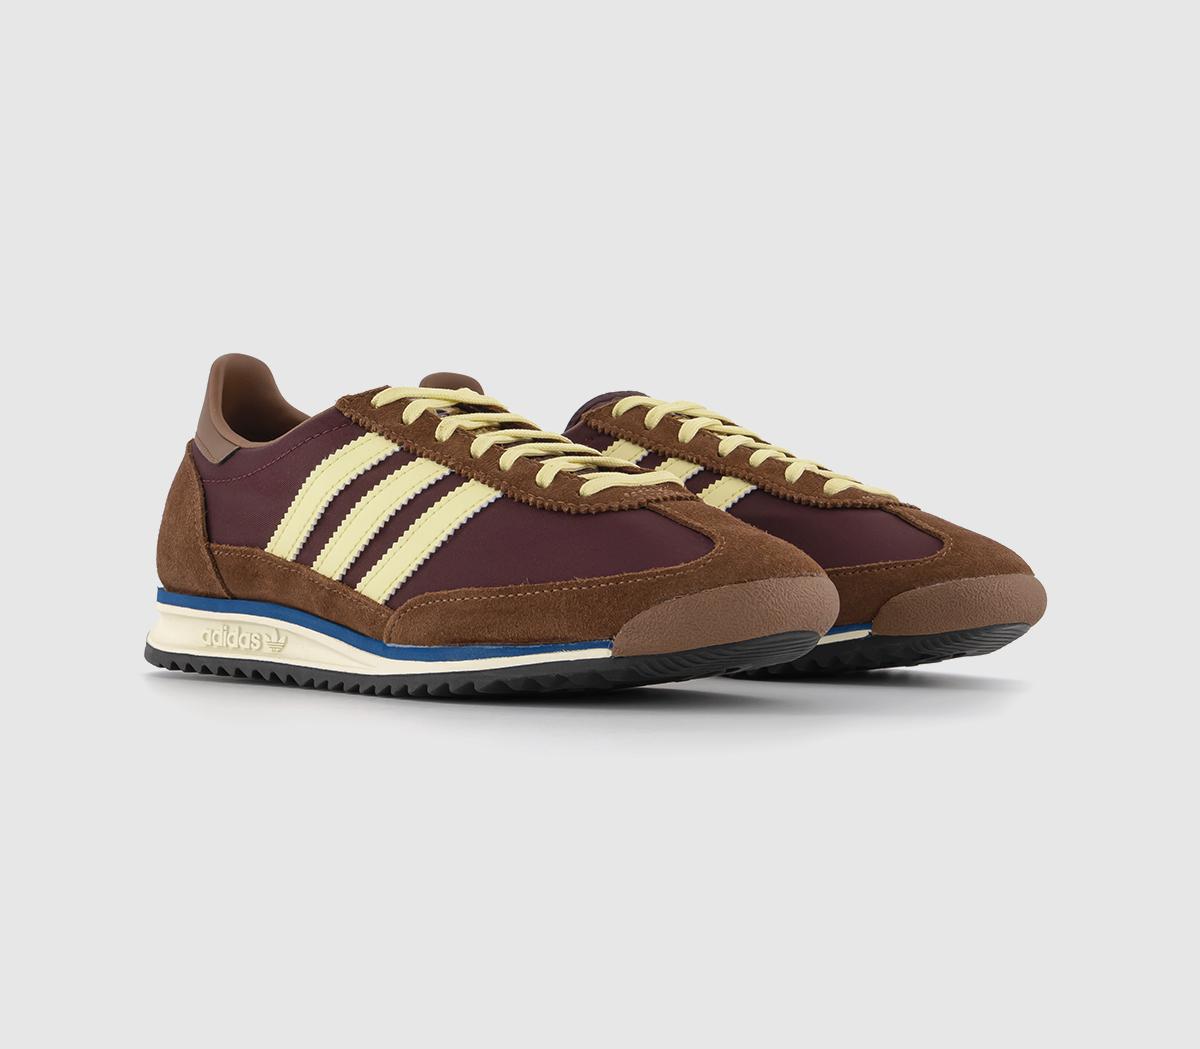 Adidas Womens SL 72 Trainers Maroon Almost Yellow Preloved Brown, 11.5